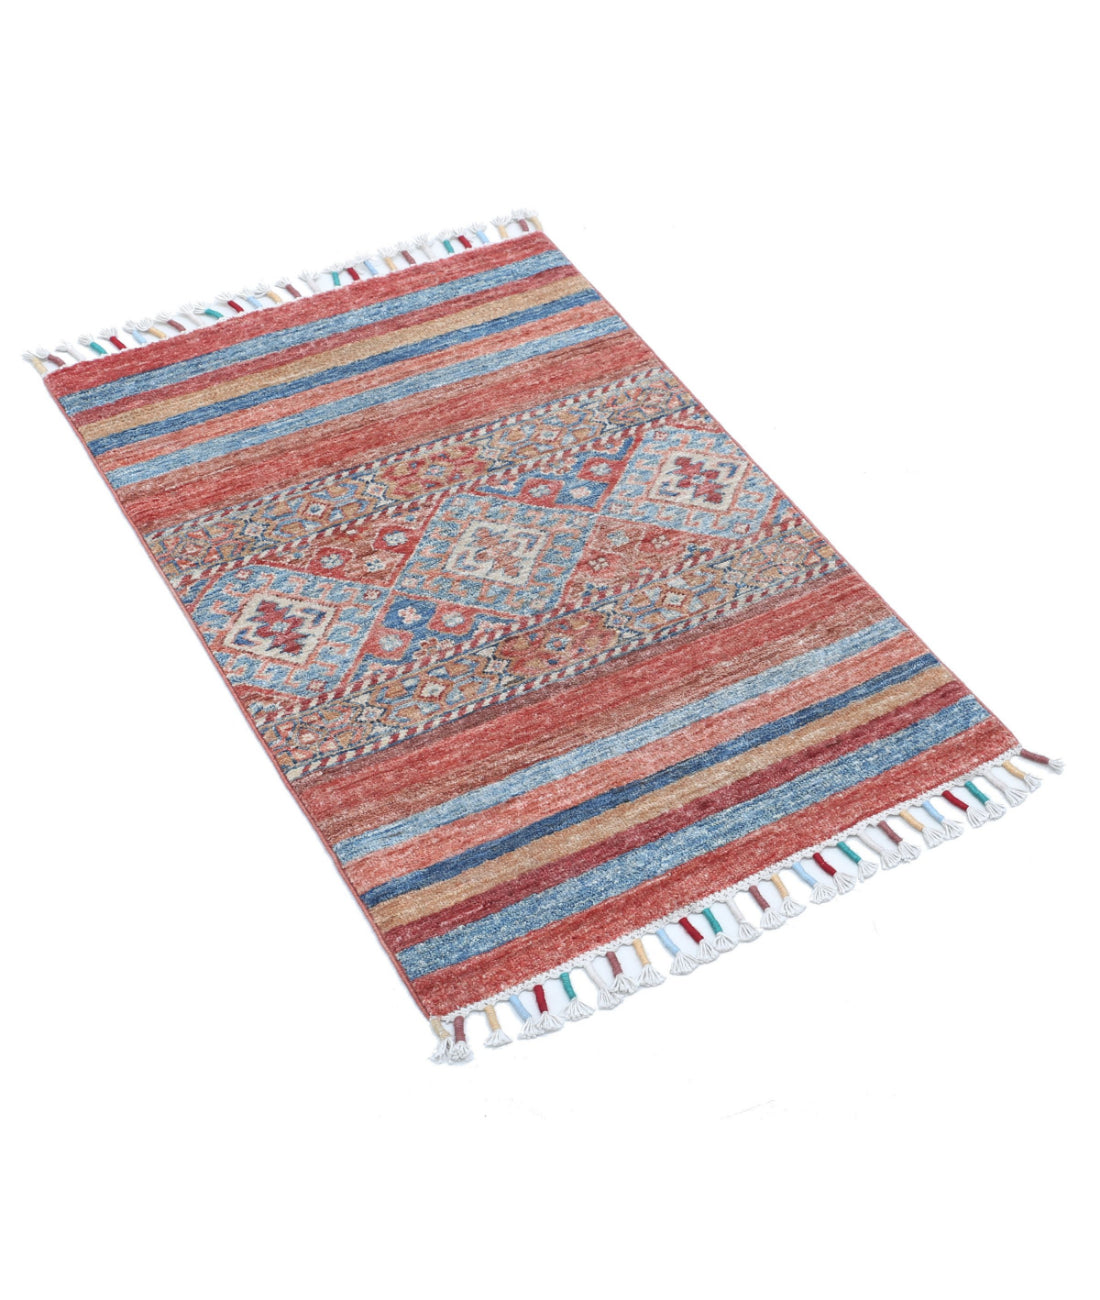 Hand Knotted Khurjeen Wool Rug - 2'2'' x 2'11'' 2'2'' x 2'11'' (65 X 88) / Multi / Multi